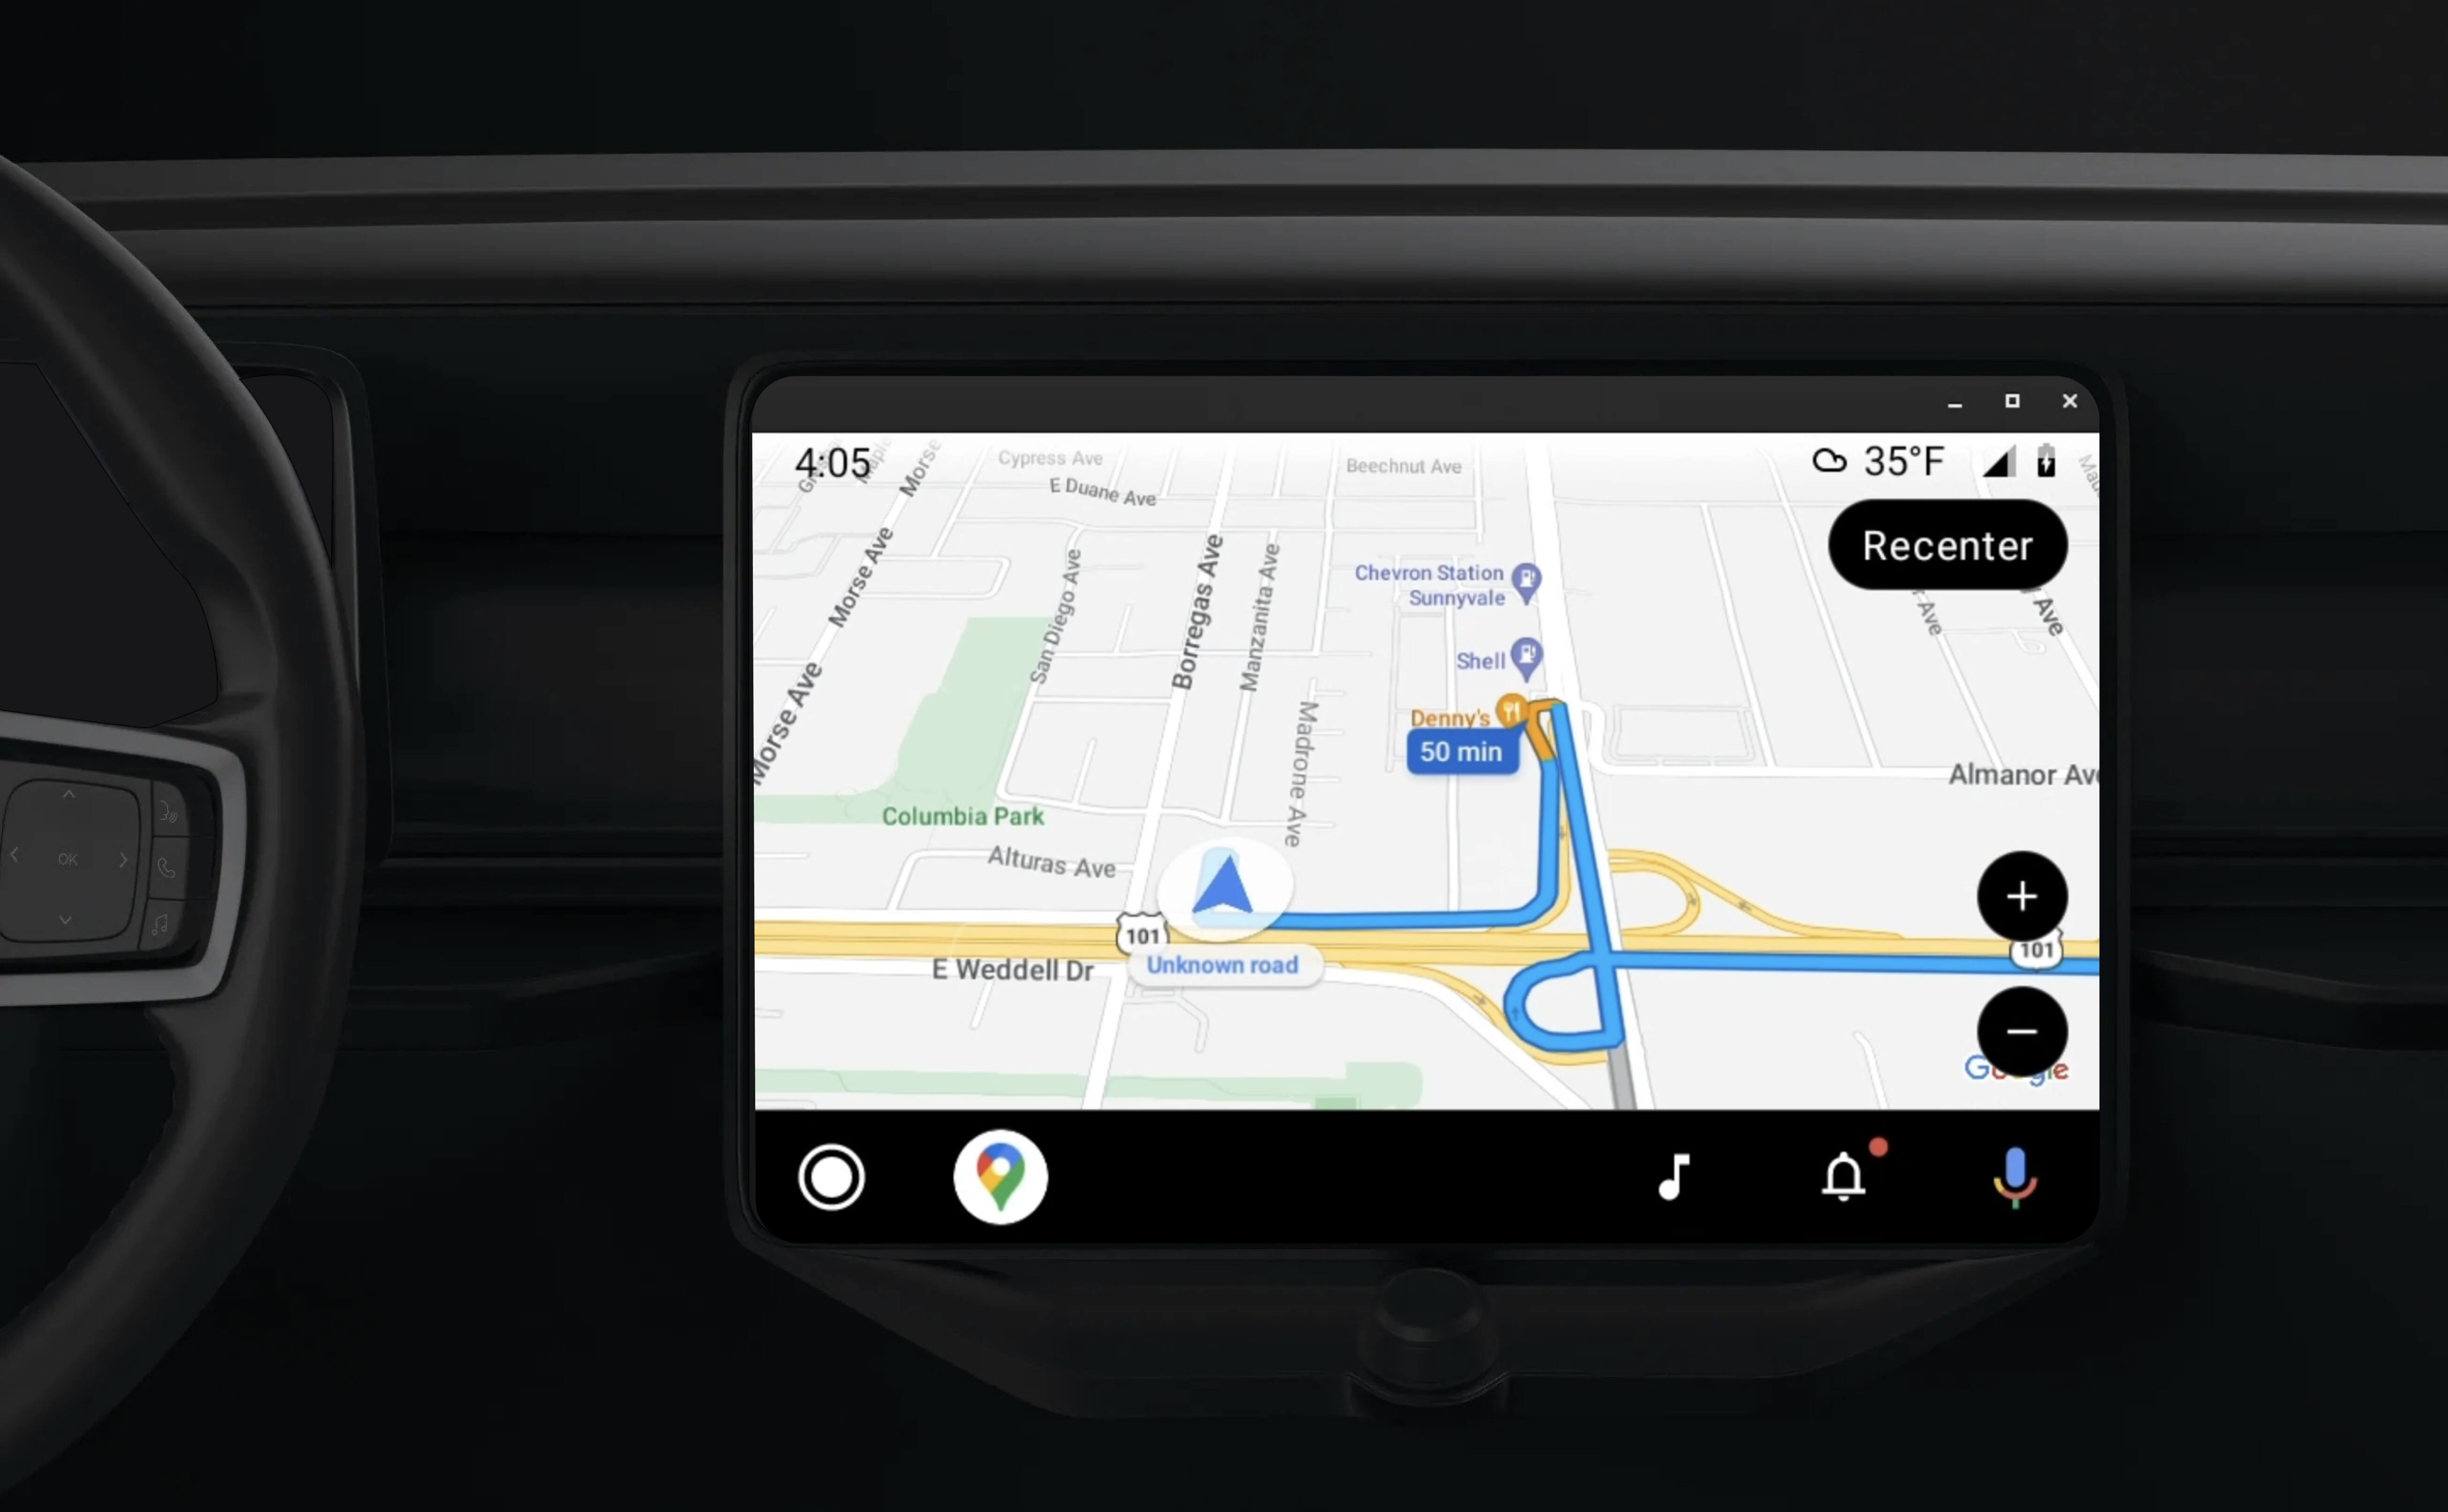 An in-dash head unit that displays guided navigation using an app enabled
for Android Auto.